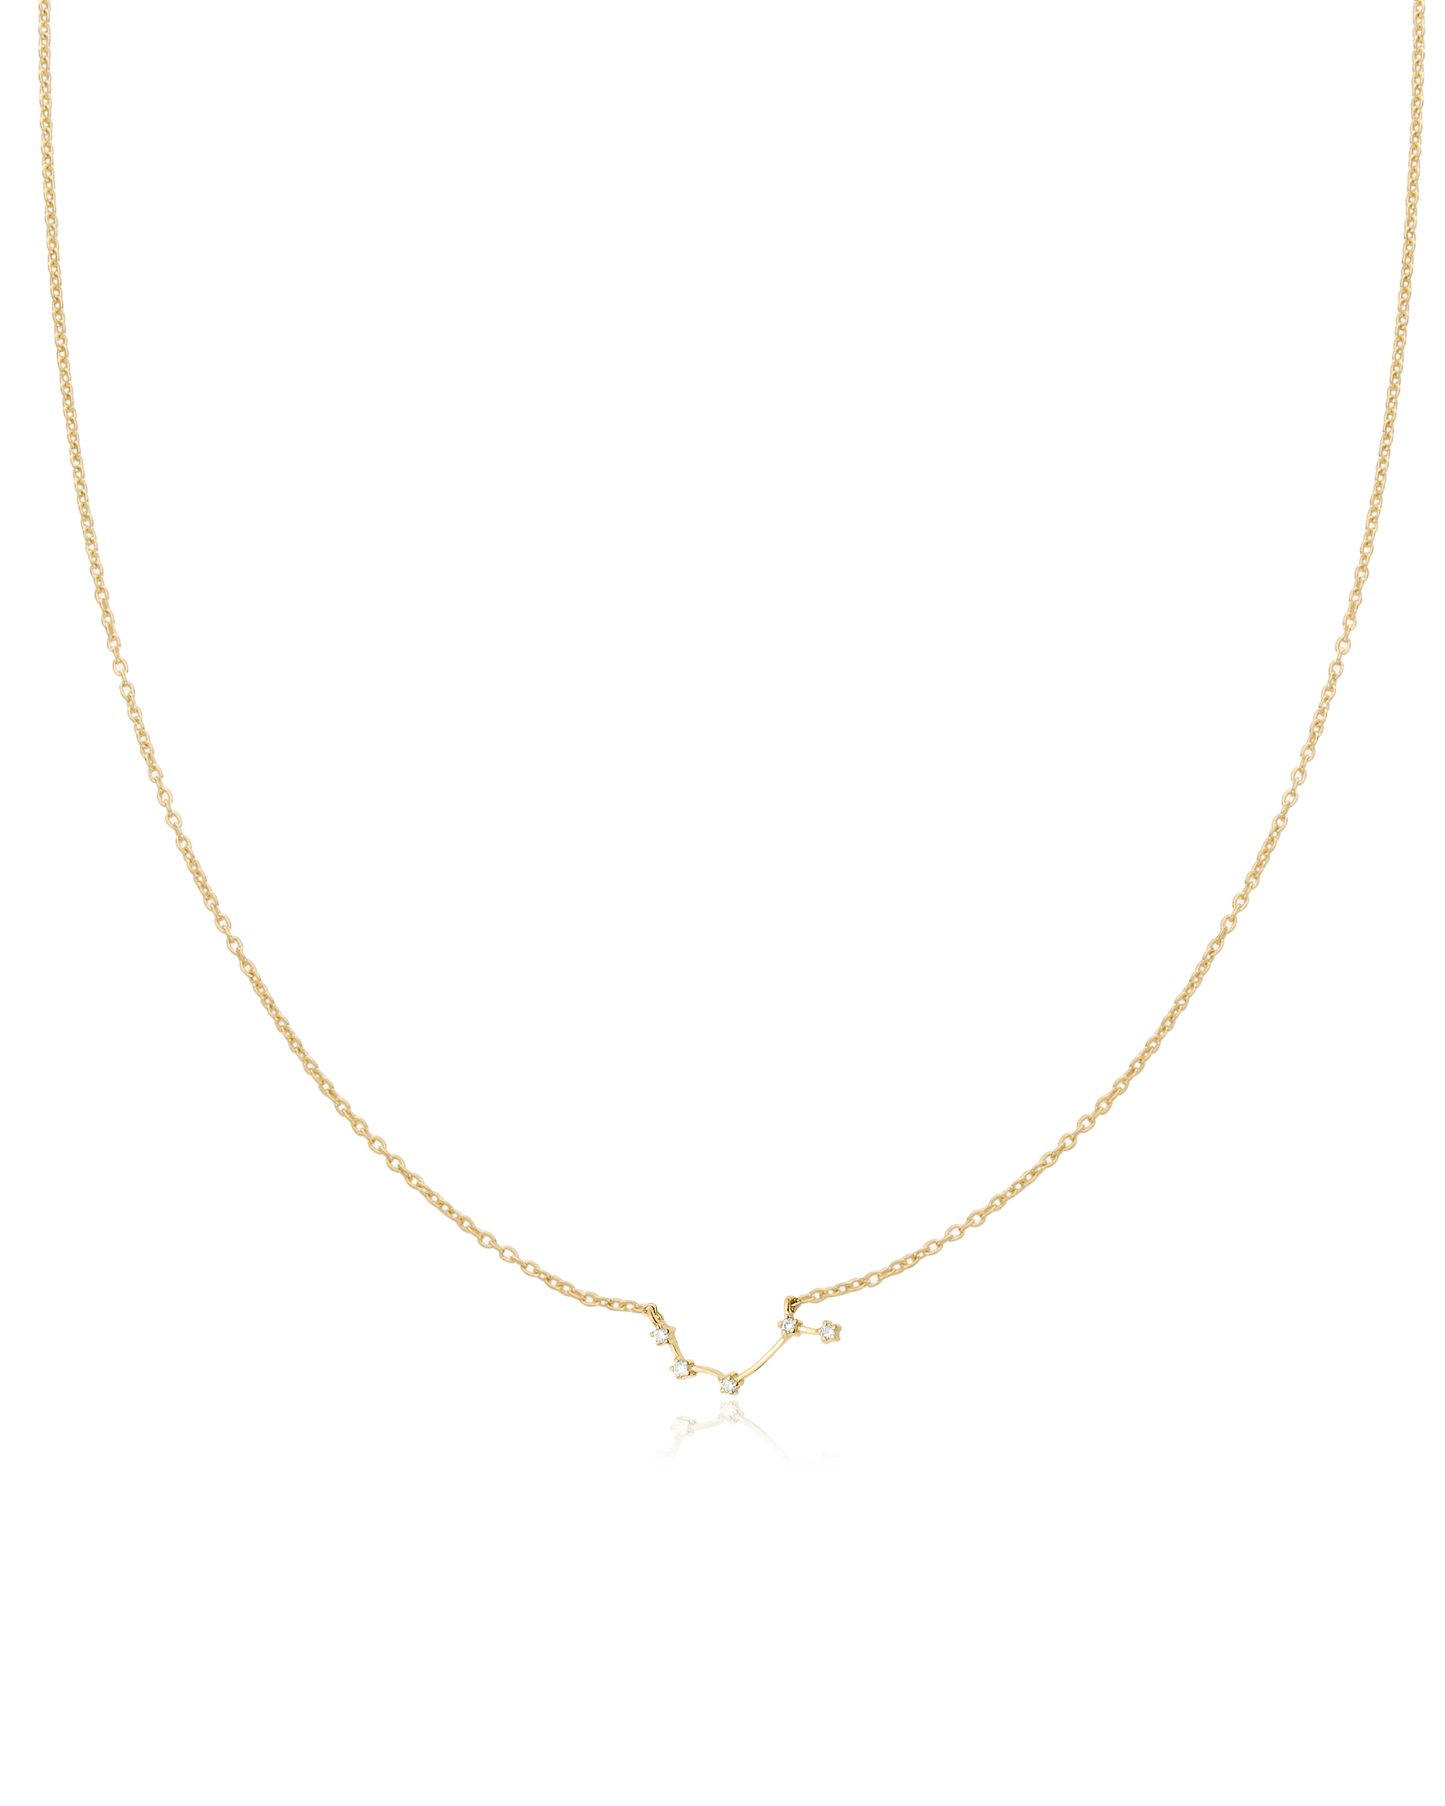 Aries Constellation Necklace - 925 Sterling Silver Necklaces magal-dev 